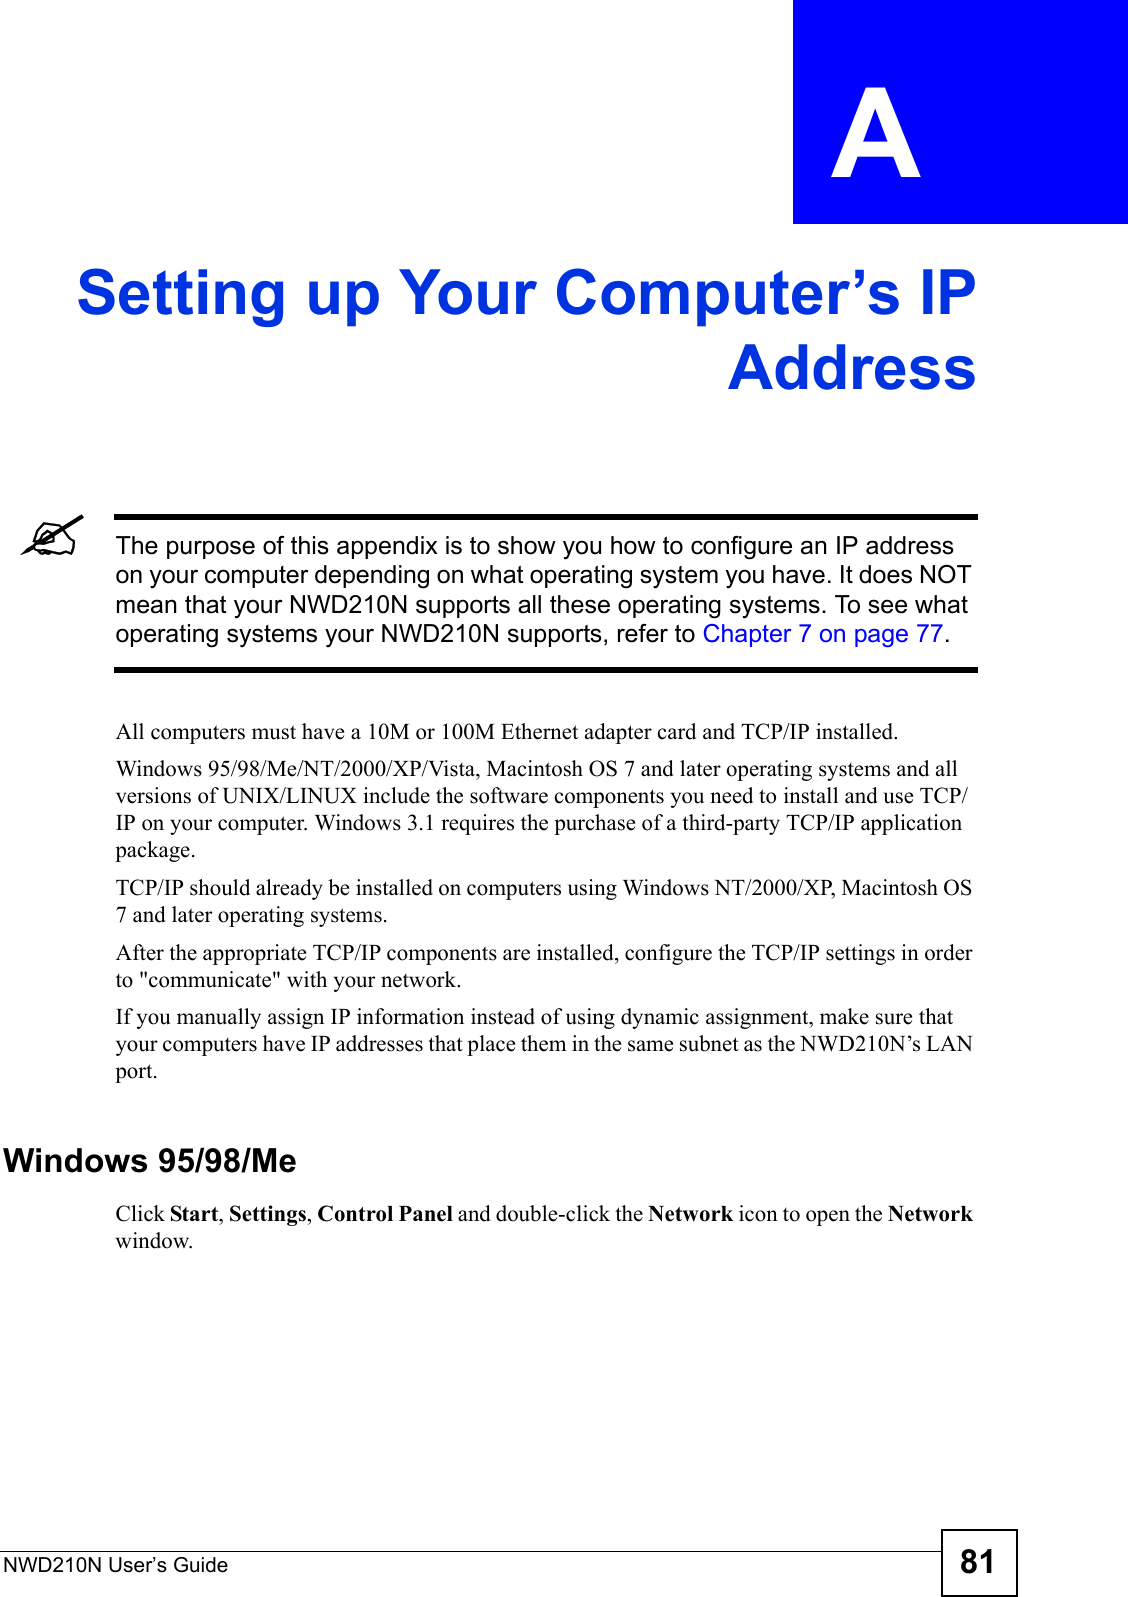 NWD210N User’s Guide 81APPENDIX  A Setting up Your Computer’s IPAddress&quot;The purpose of this appendix is to show you how to configure an IP address on your computer depending on what operating system you have. It does NOT mean that your NWD210N supports all these operating systems. To see what operating systems your NWD210N supports, refer to Chapter 7 on page 77.All computers must have a 10M or 100M Ethernet adapter card and TCP/IP installed. Windows 95/98/Me/NT/2000/XP/Vista, Macintosh OS 7 and later operating systems and all versions of UNIX/LINUX include the software components you need to install and use TCP/IP on your computer. Windows 3.1 requires the purchase of a third-party TCP/IP application package.TCP/IP should already be installed on computers using Windows NT/2000/XP, Macintosh OS 7 and later operating systems.After the appropriate TCP/IP components are installed, configure the TCP/IP settings in order to &quot;communicate&quot; with your network. If you manually assign IP information instead of using dynamic assignment, make sure that your computers have IP addresses that place them in the same subnet as the NWD210N’s LAN port.Windows 95/98/MeClick Start, Settings, Control Panel and double-click the Network icon to open the Network window.